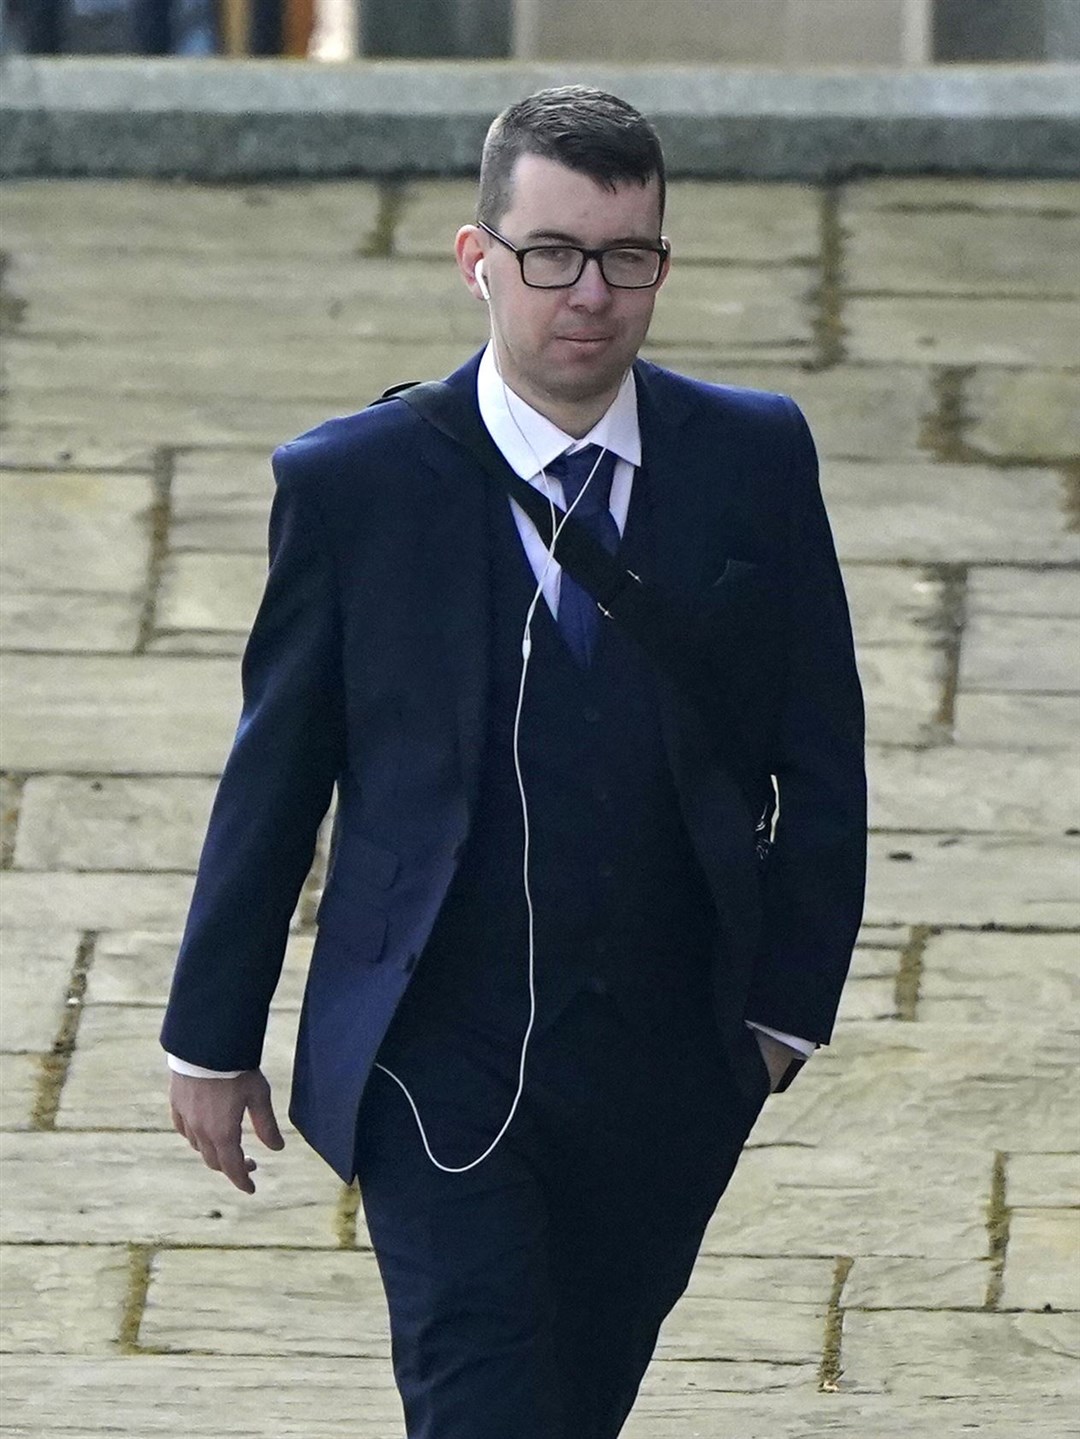 Alex Davies, founder of neo-Nazi group National Action, was found guilty at Winchester Crown Court (Andrew Matthews/PA)